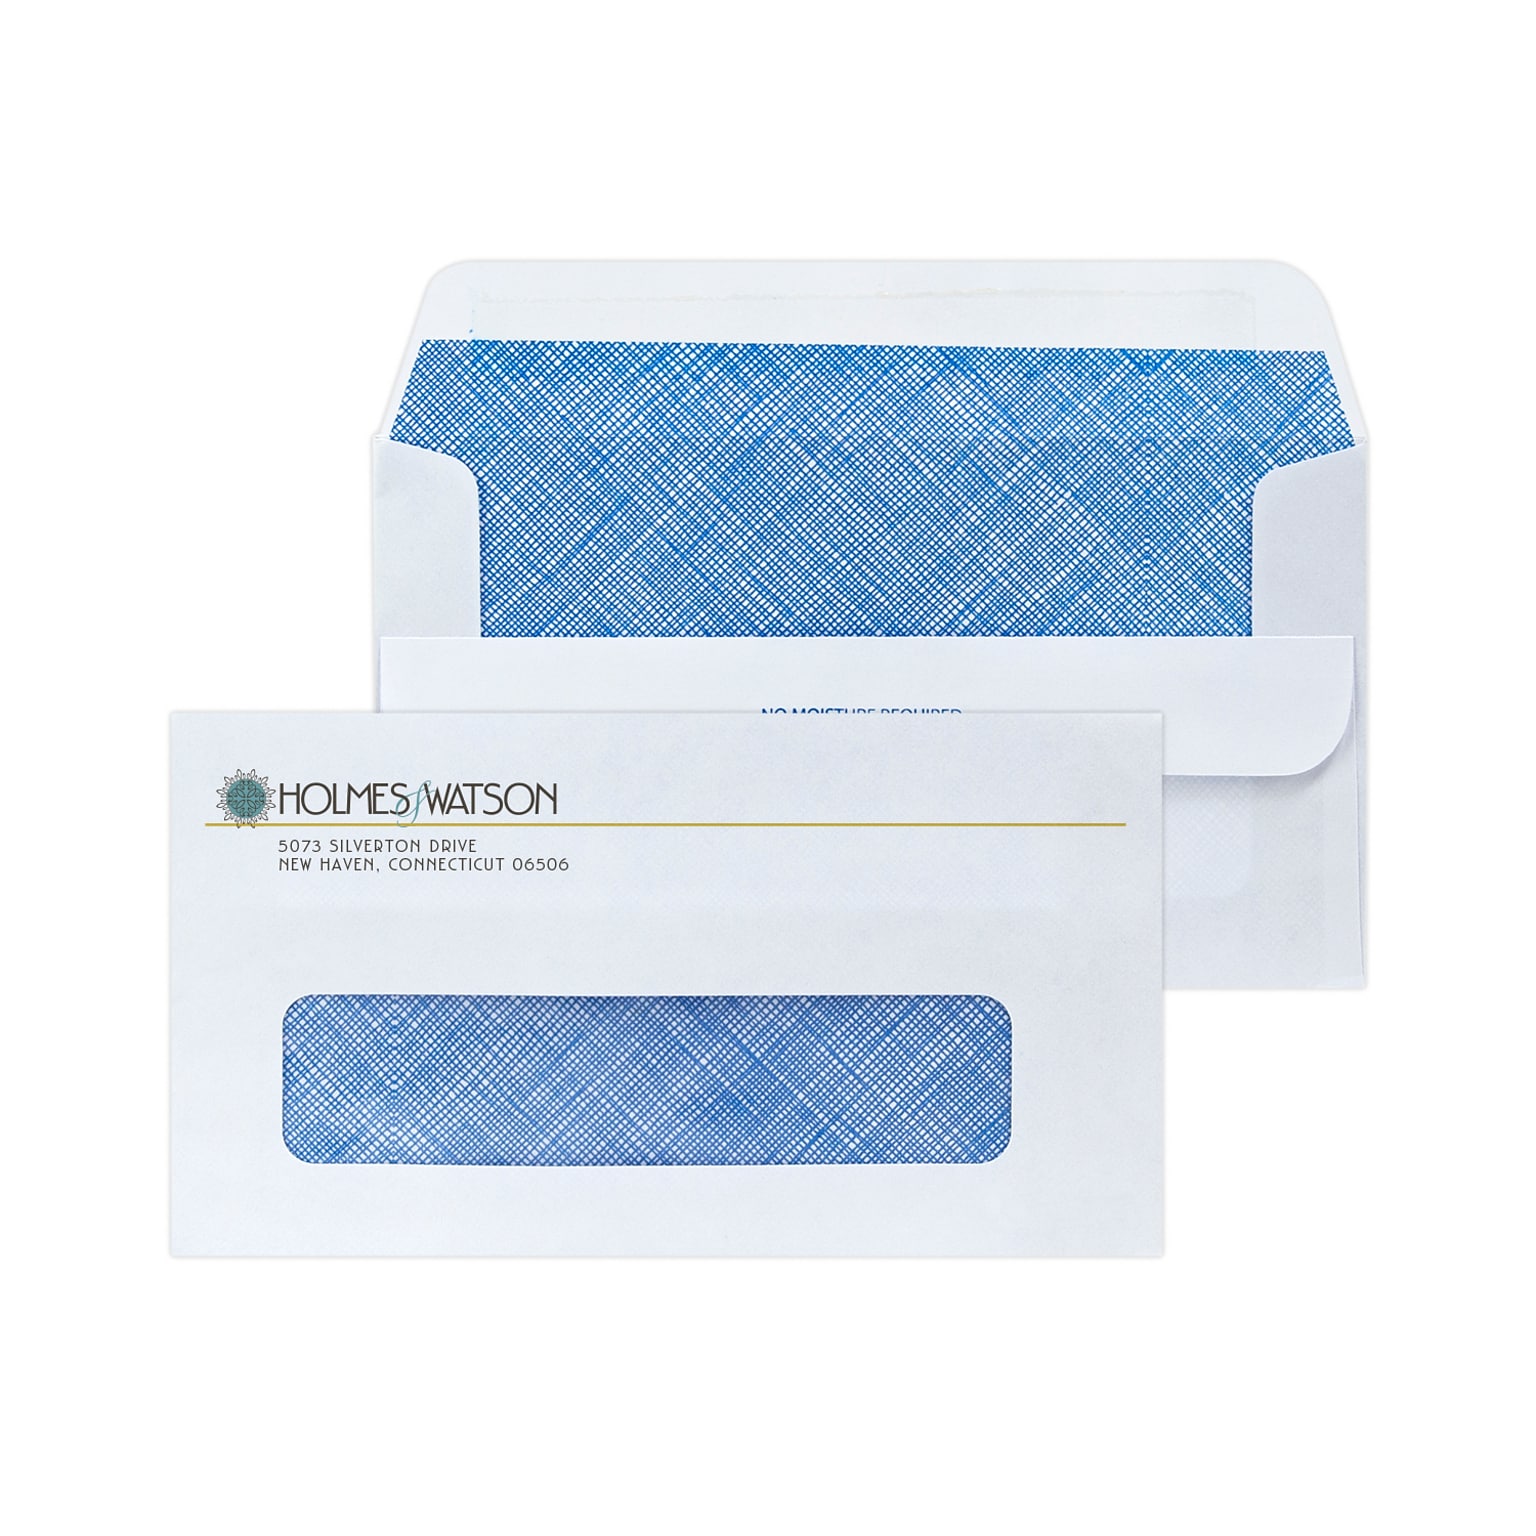 Custom Full Color #6-3/4 Self Seal Window Envelopes with Security Tint, 3 5/8 x 6 1/2, 24# White Wove, 250 / Pack